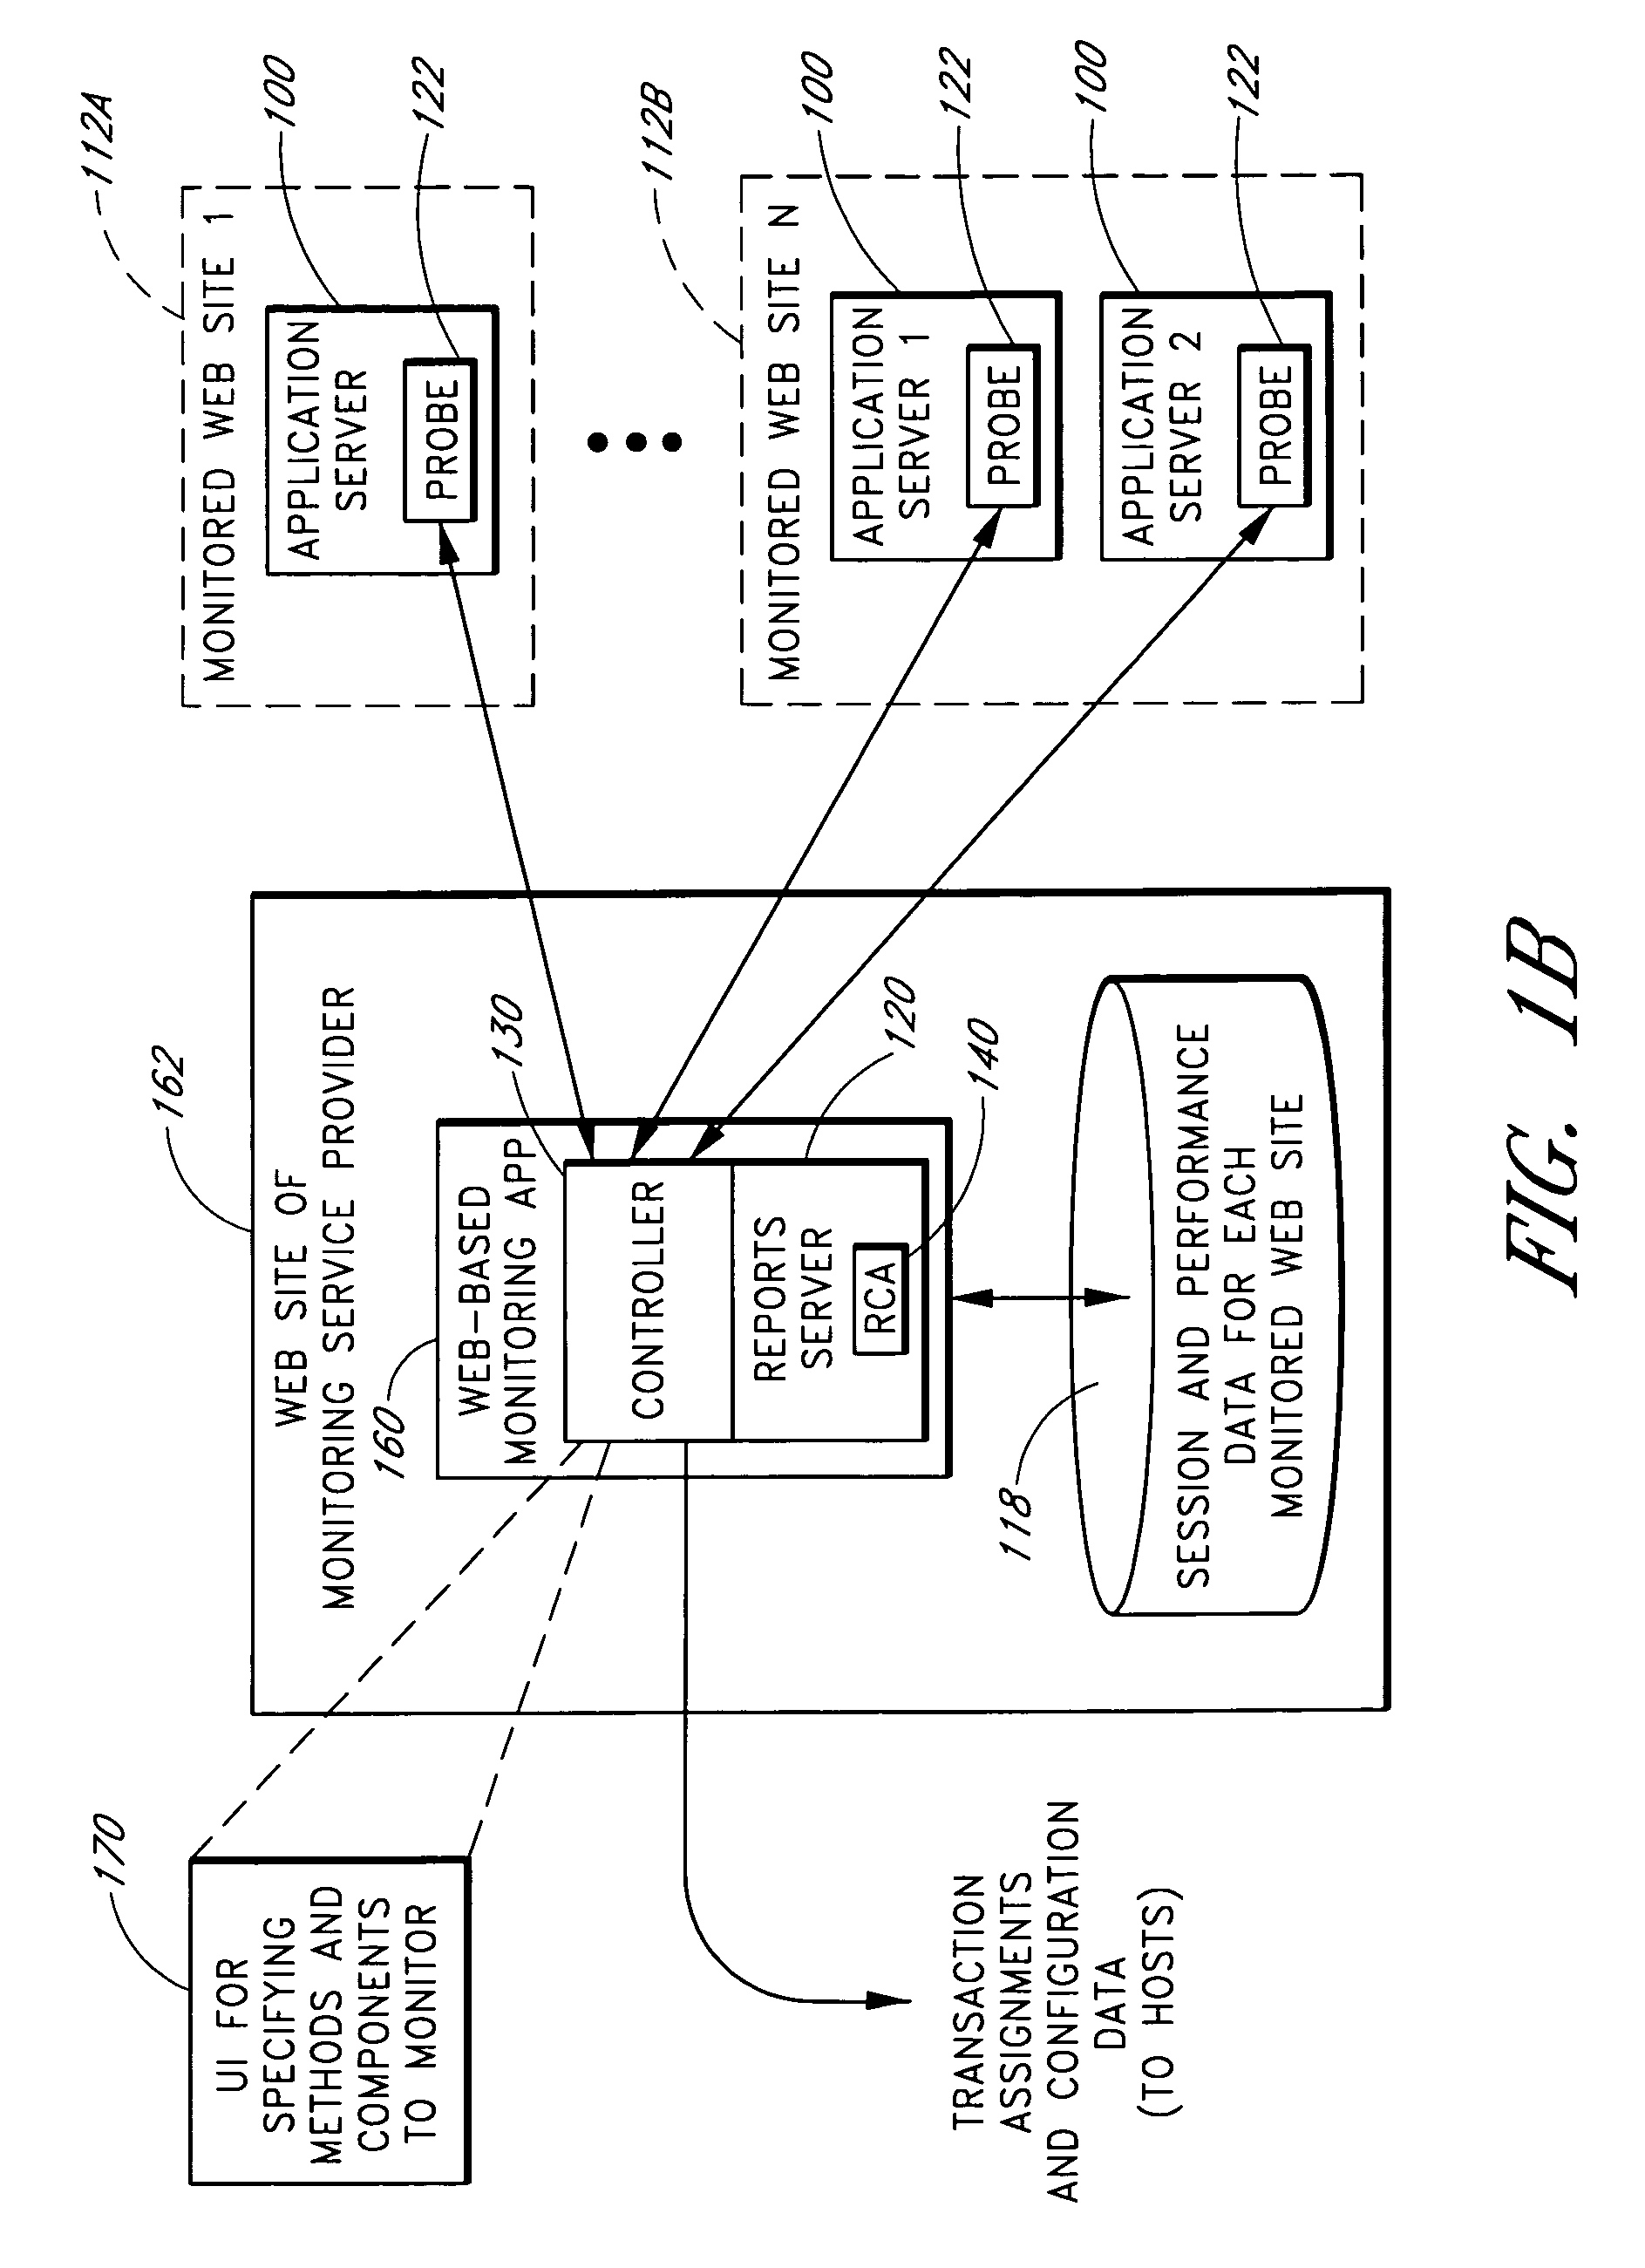 System and methods for monitoring application server performance